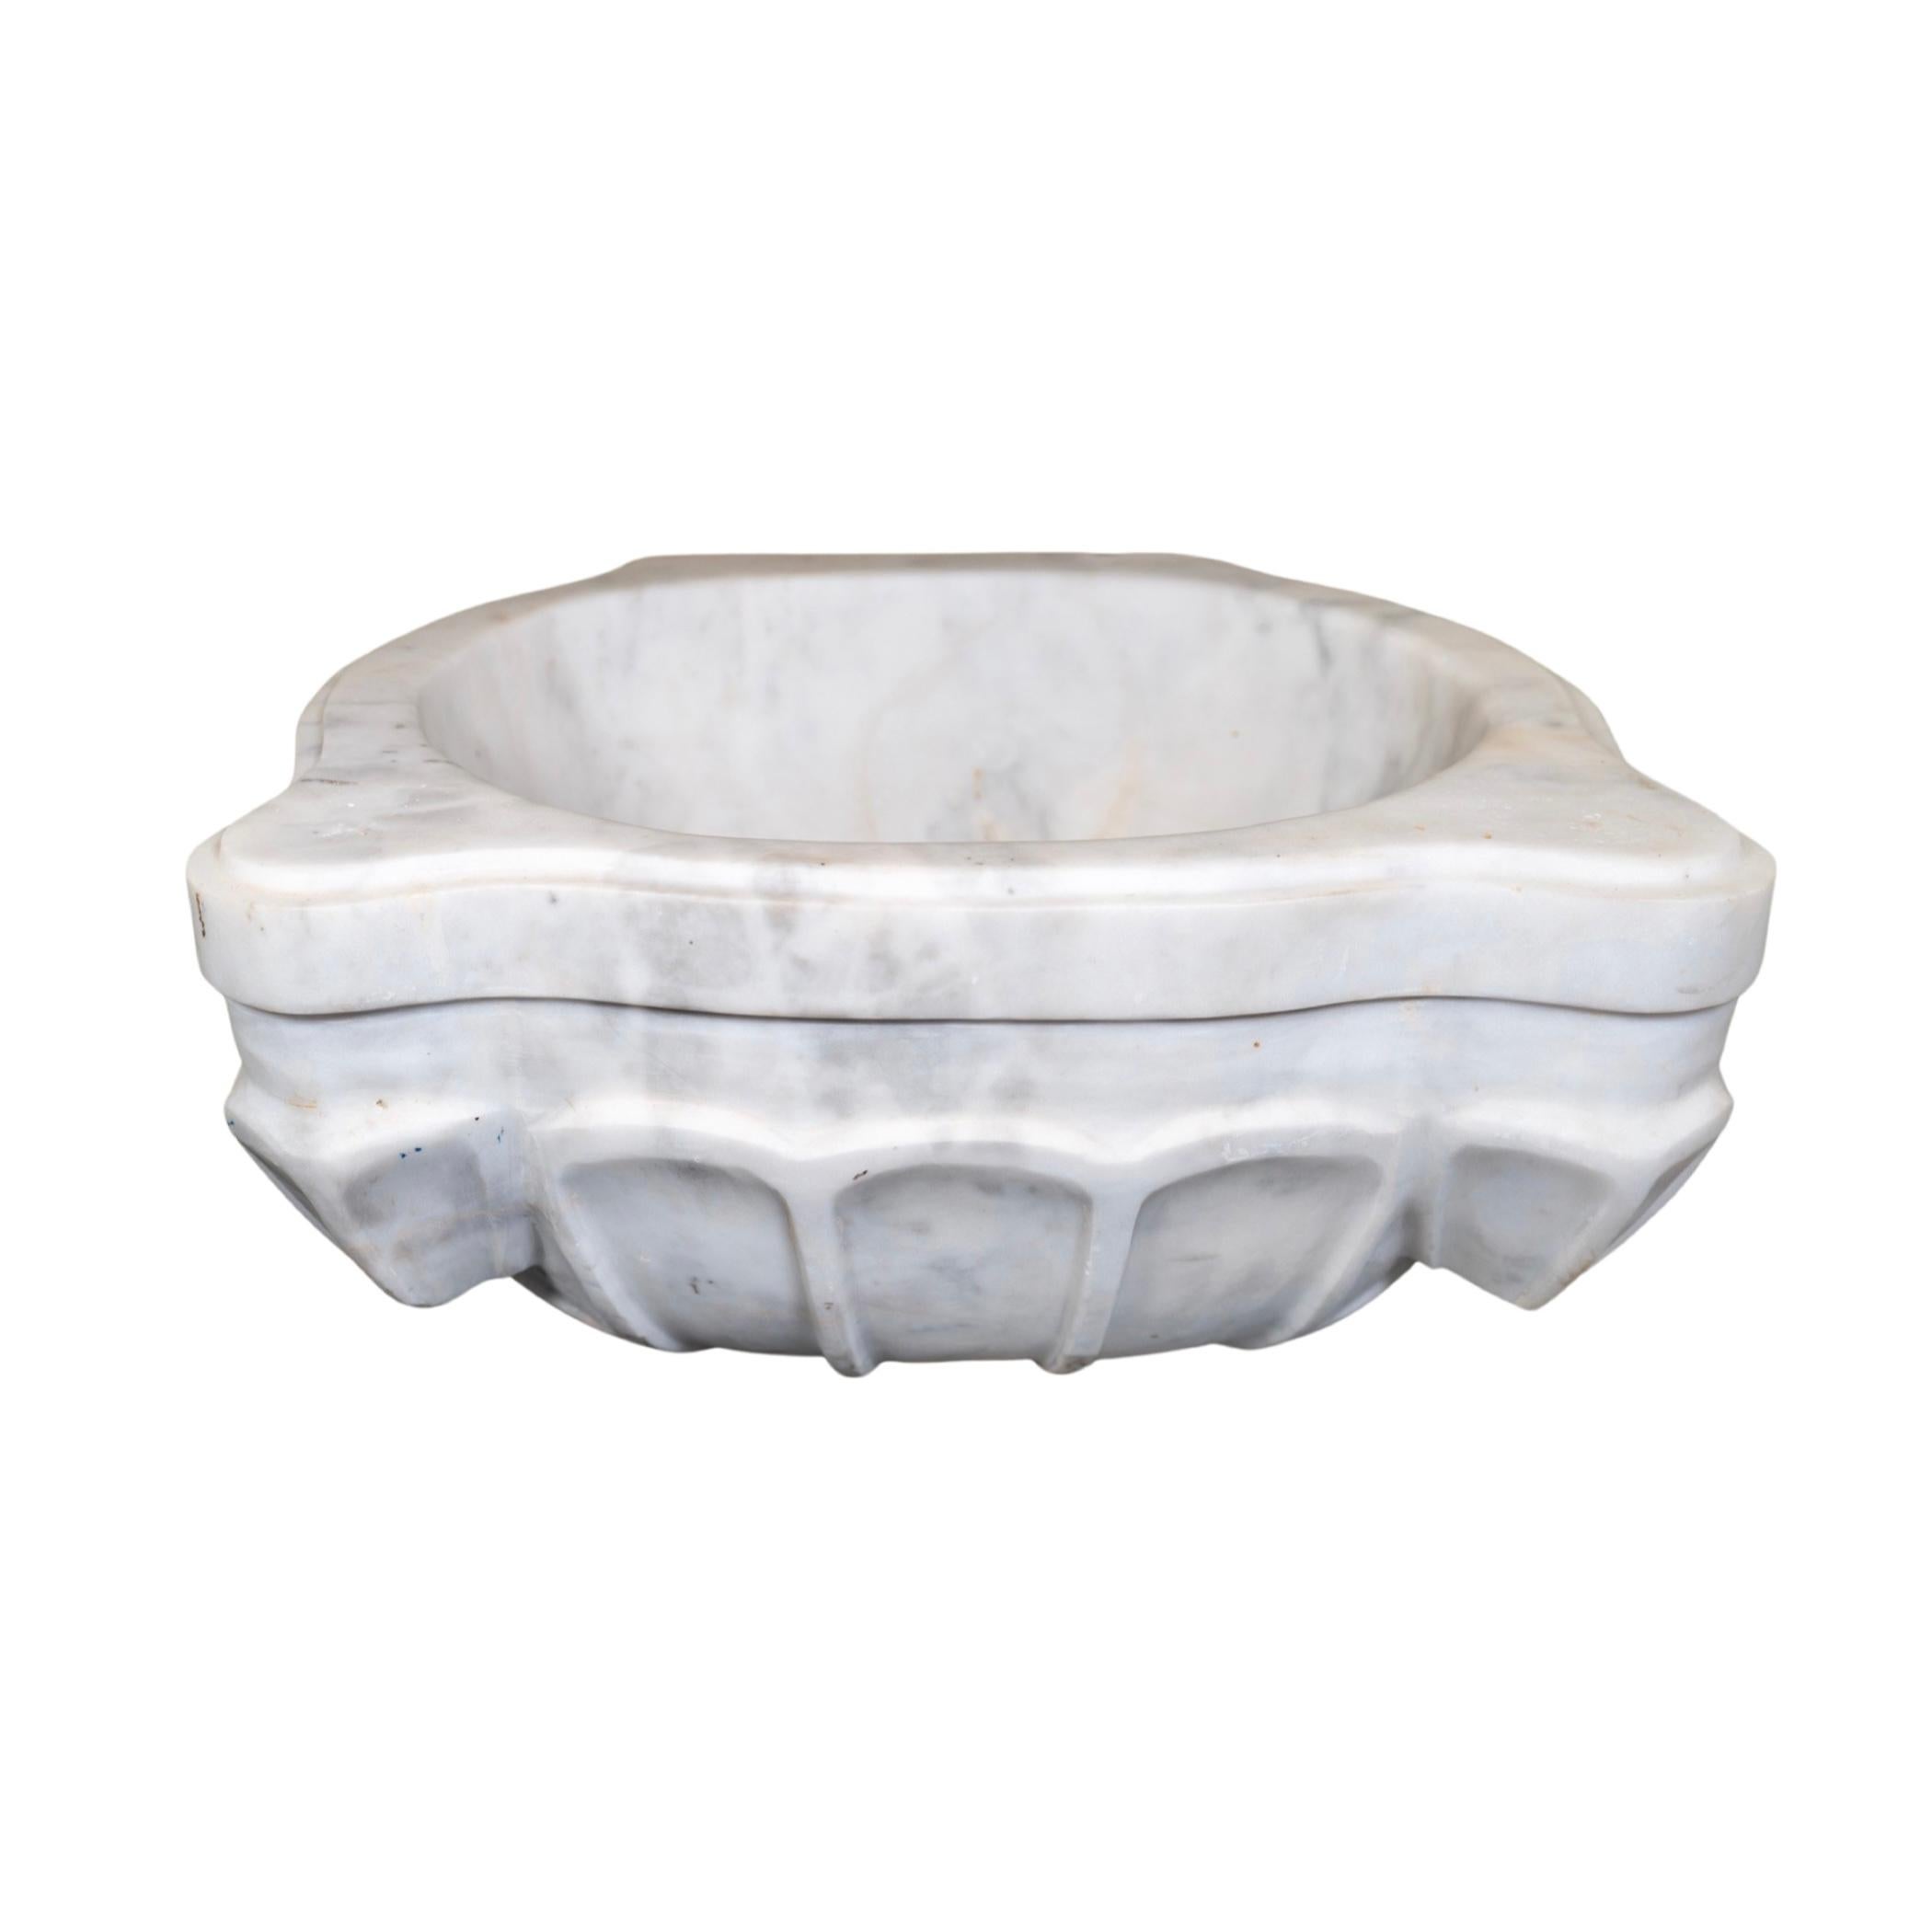 This premium French white marble sink is crafted from 18th century techniques, offering a timeless and refined aesthetic to any setting. Its unique composition remains durable and refracts light in beautiful ways. Its luxurious look and solid